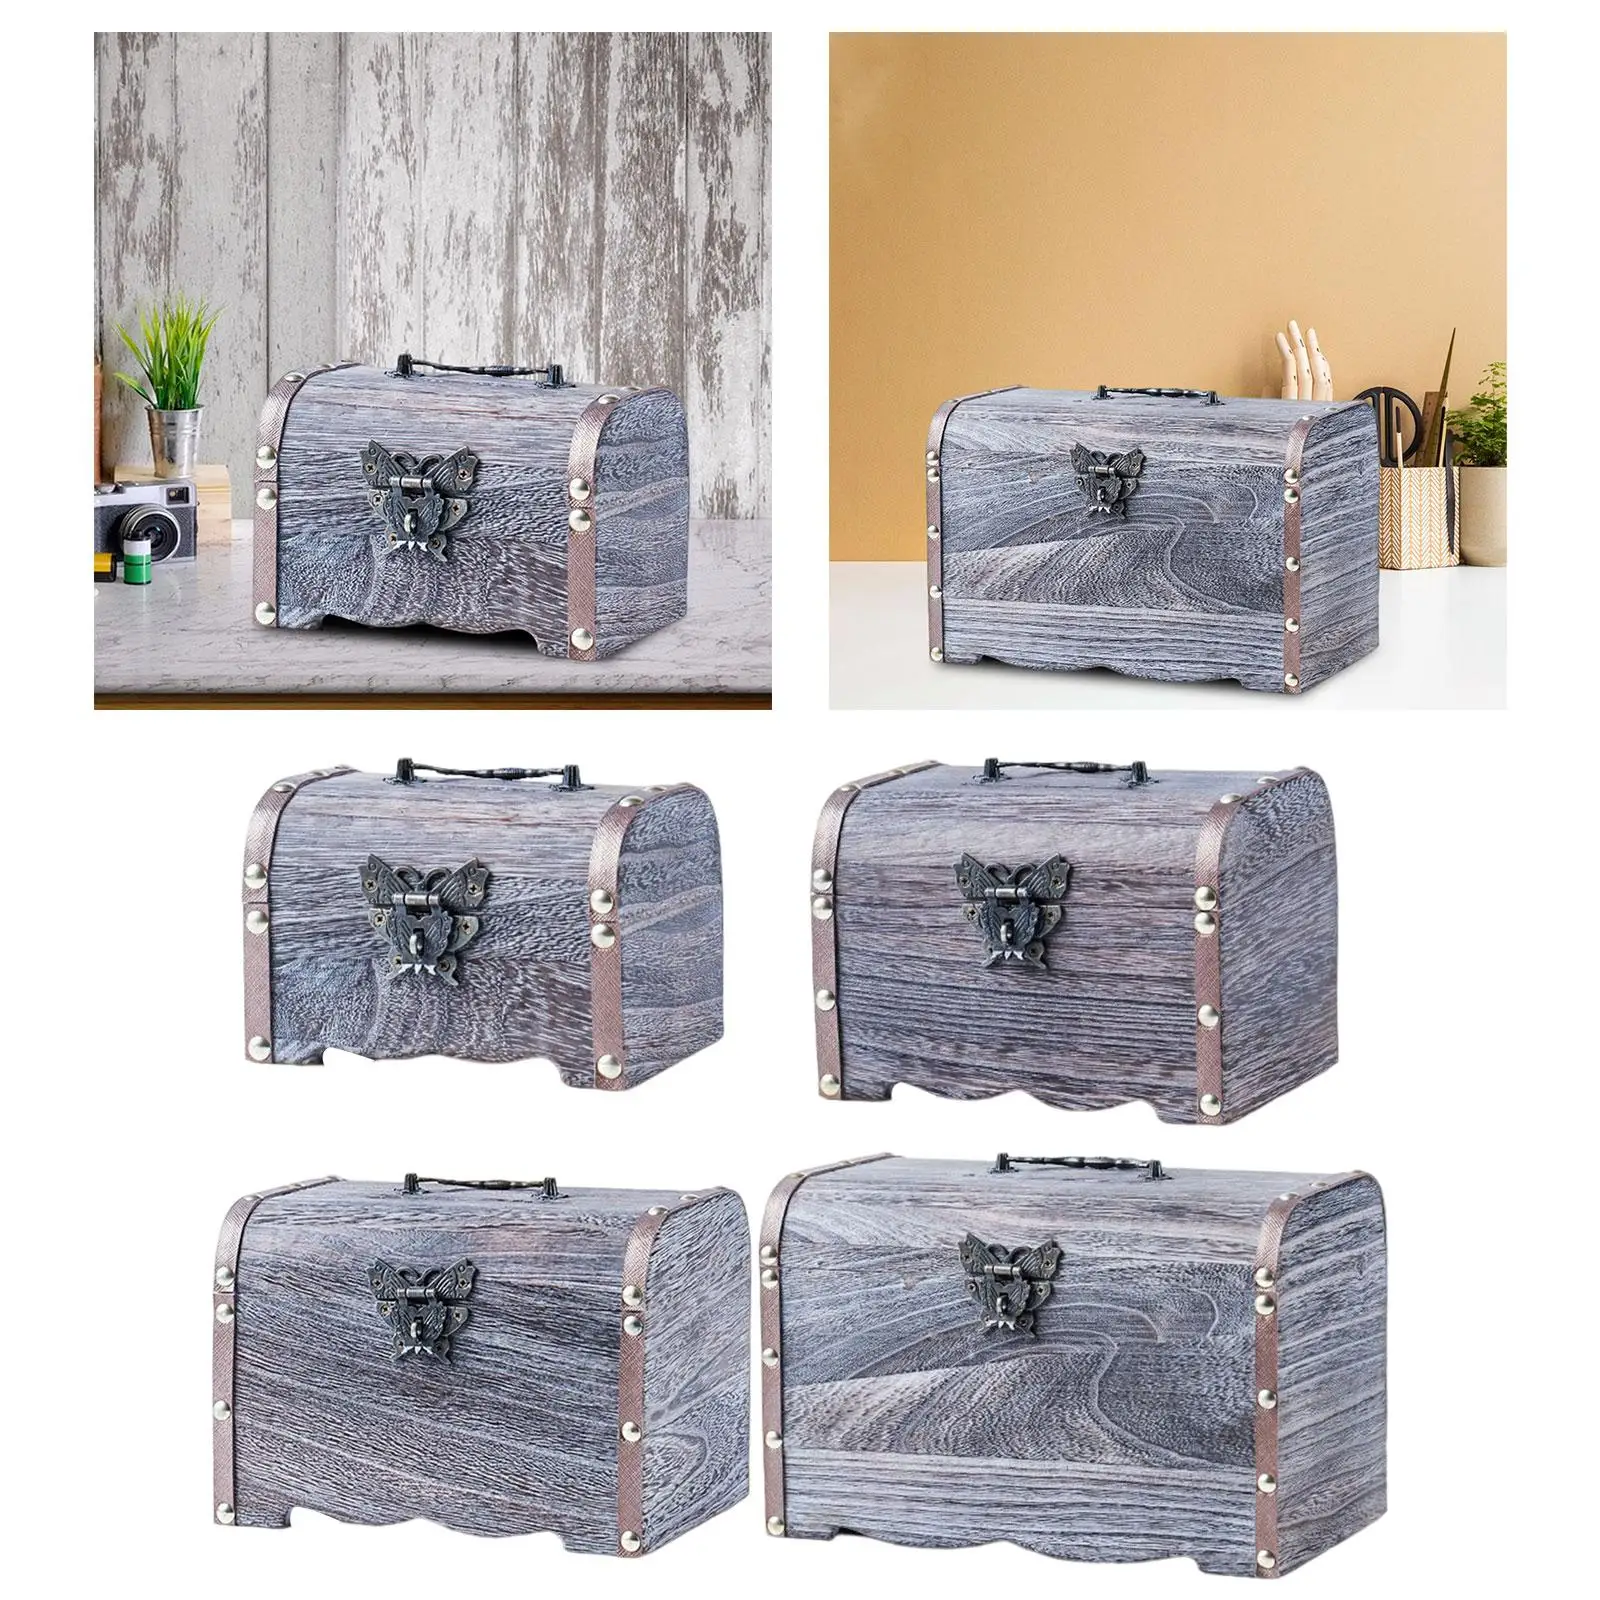 Treasure Chest Retro Style with Top Handle Storage Box Decoration Piggy Bank Money Saving Box for Girls Boys Prizes Adults Kids